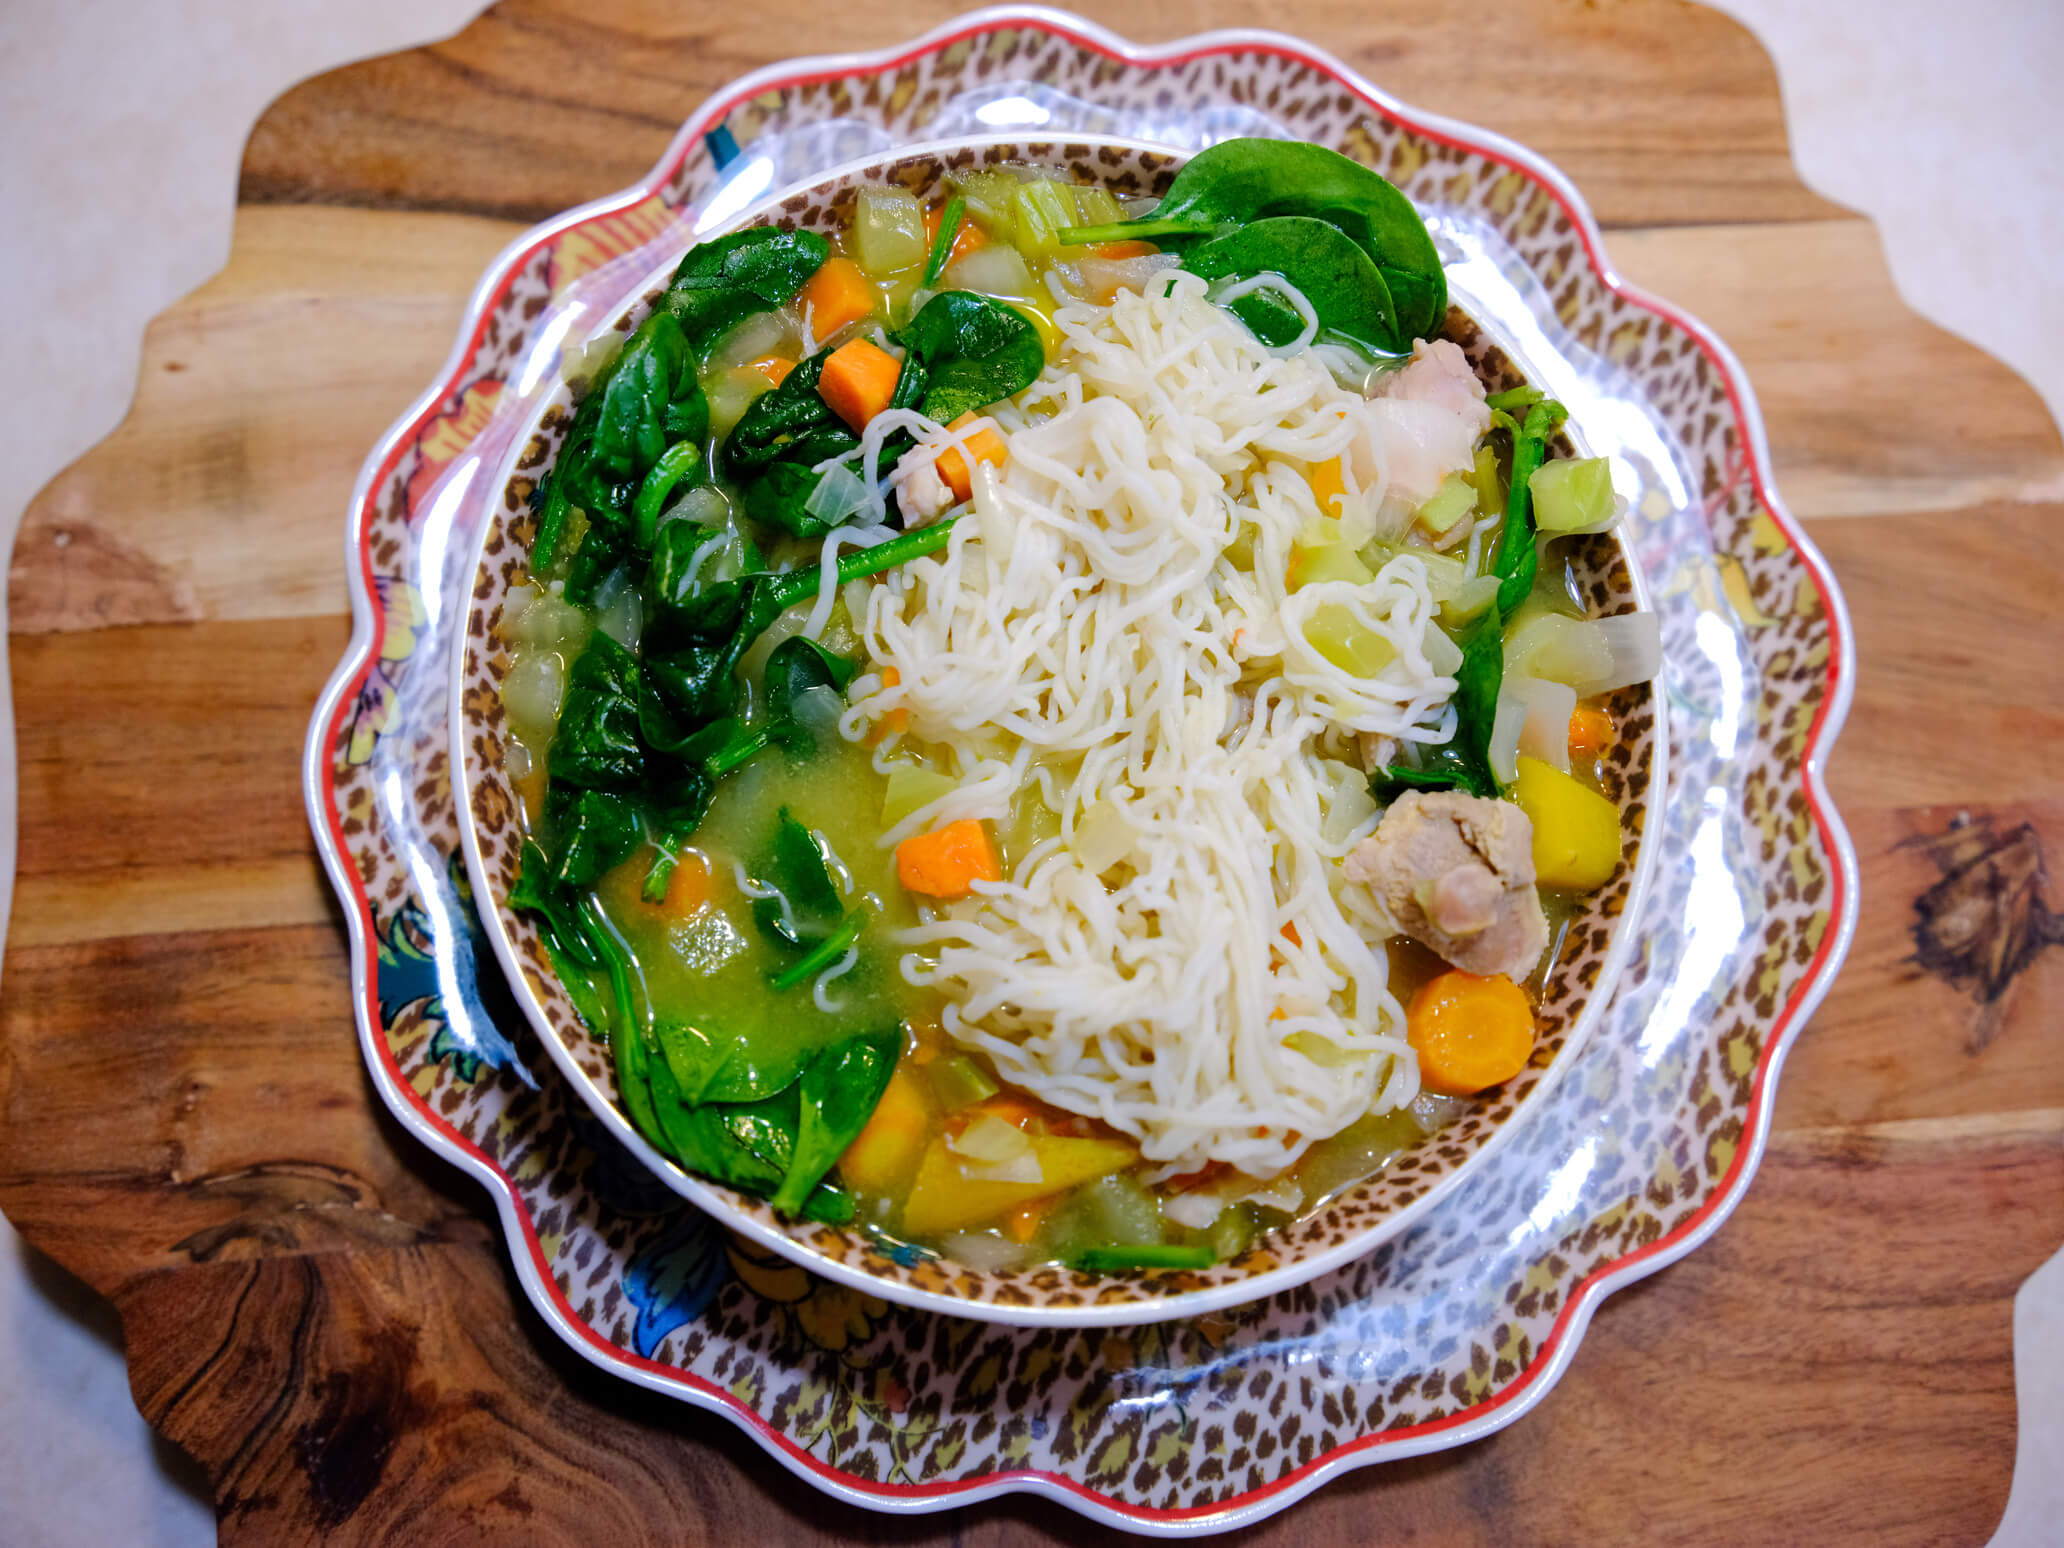 A large bowl full of low-carb Chicken Noodle Soup, made with It's Skinny pasta, spinach, vegetables, and a savory broth.